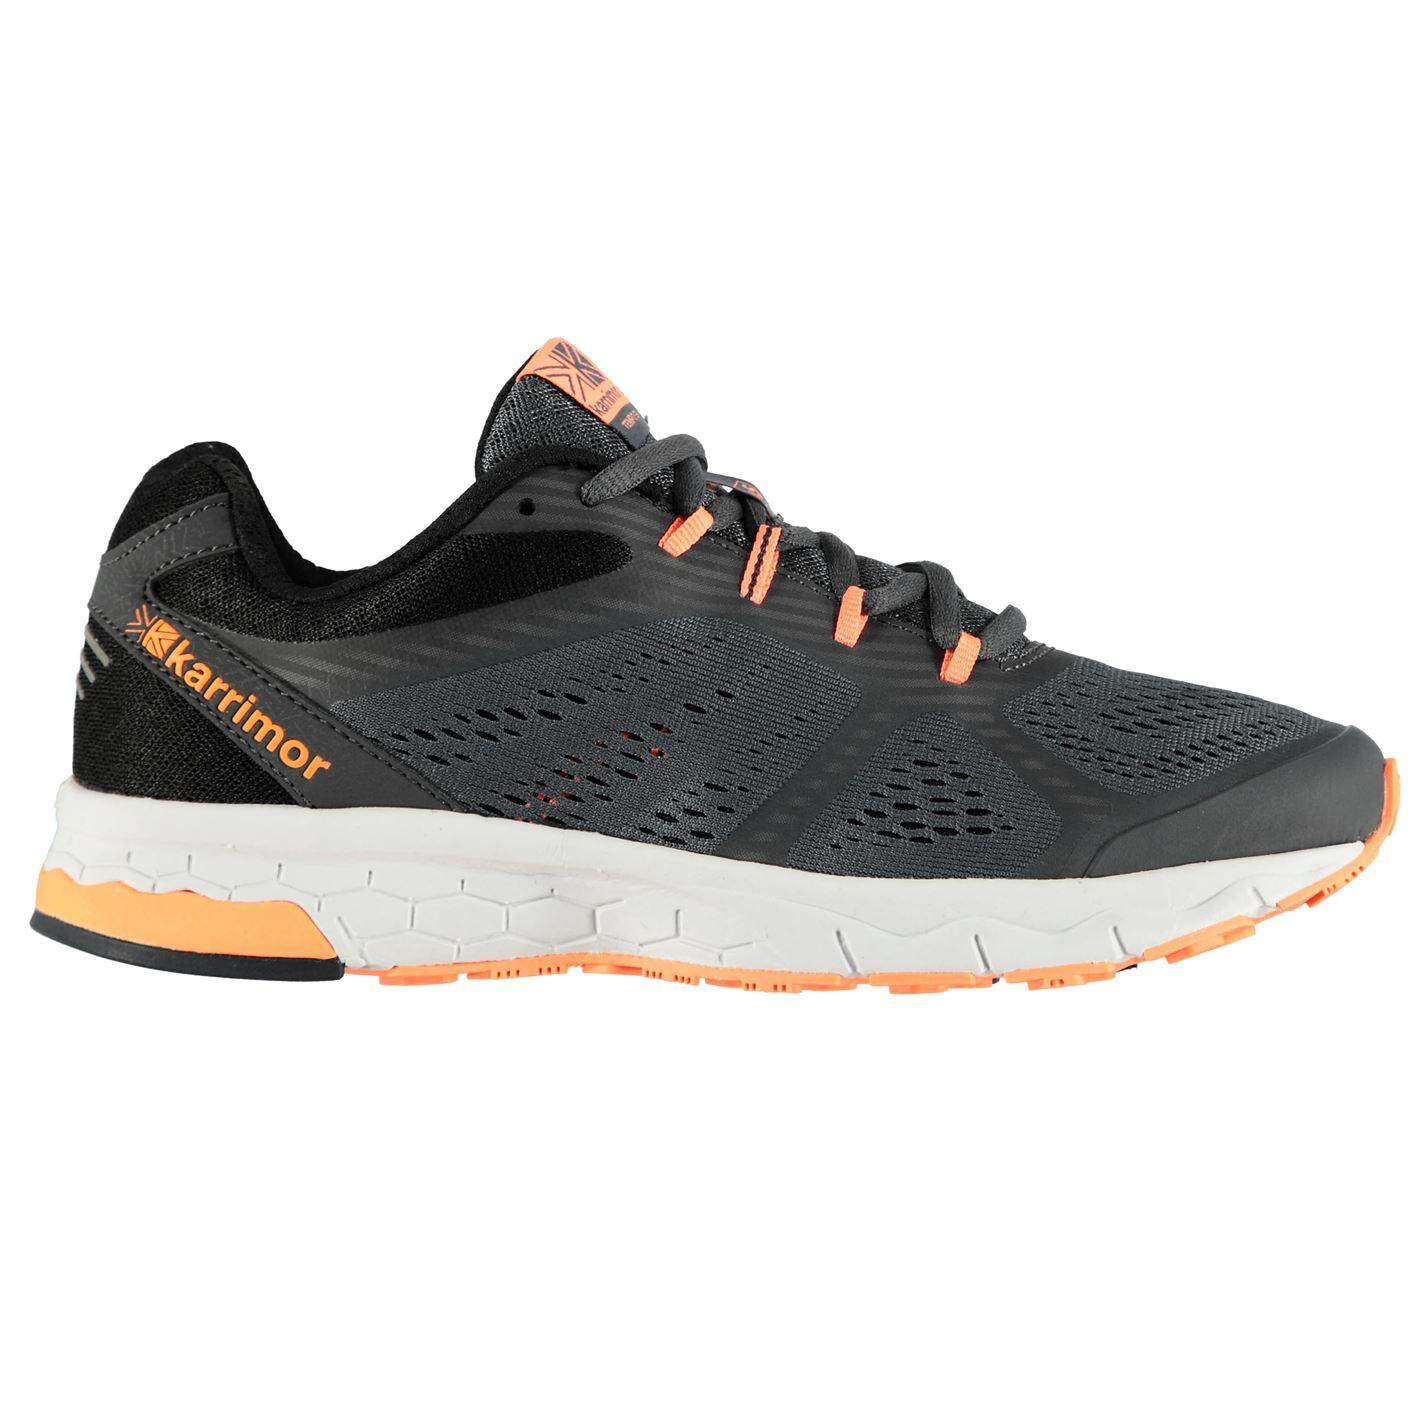 fabric flyer runner ladies trainers